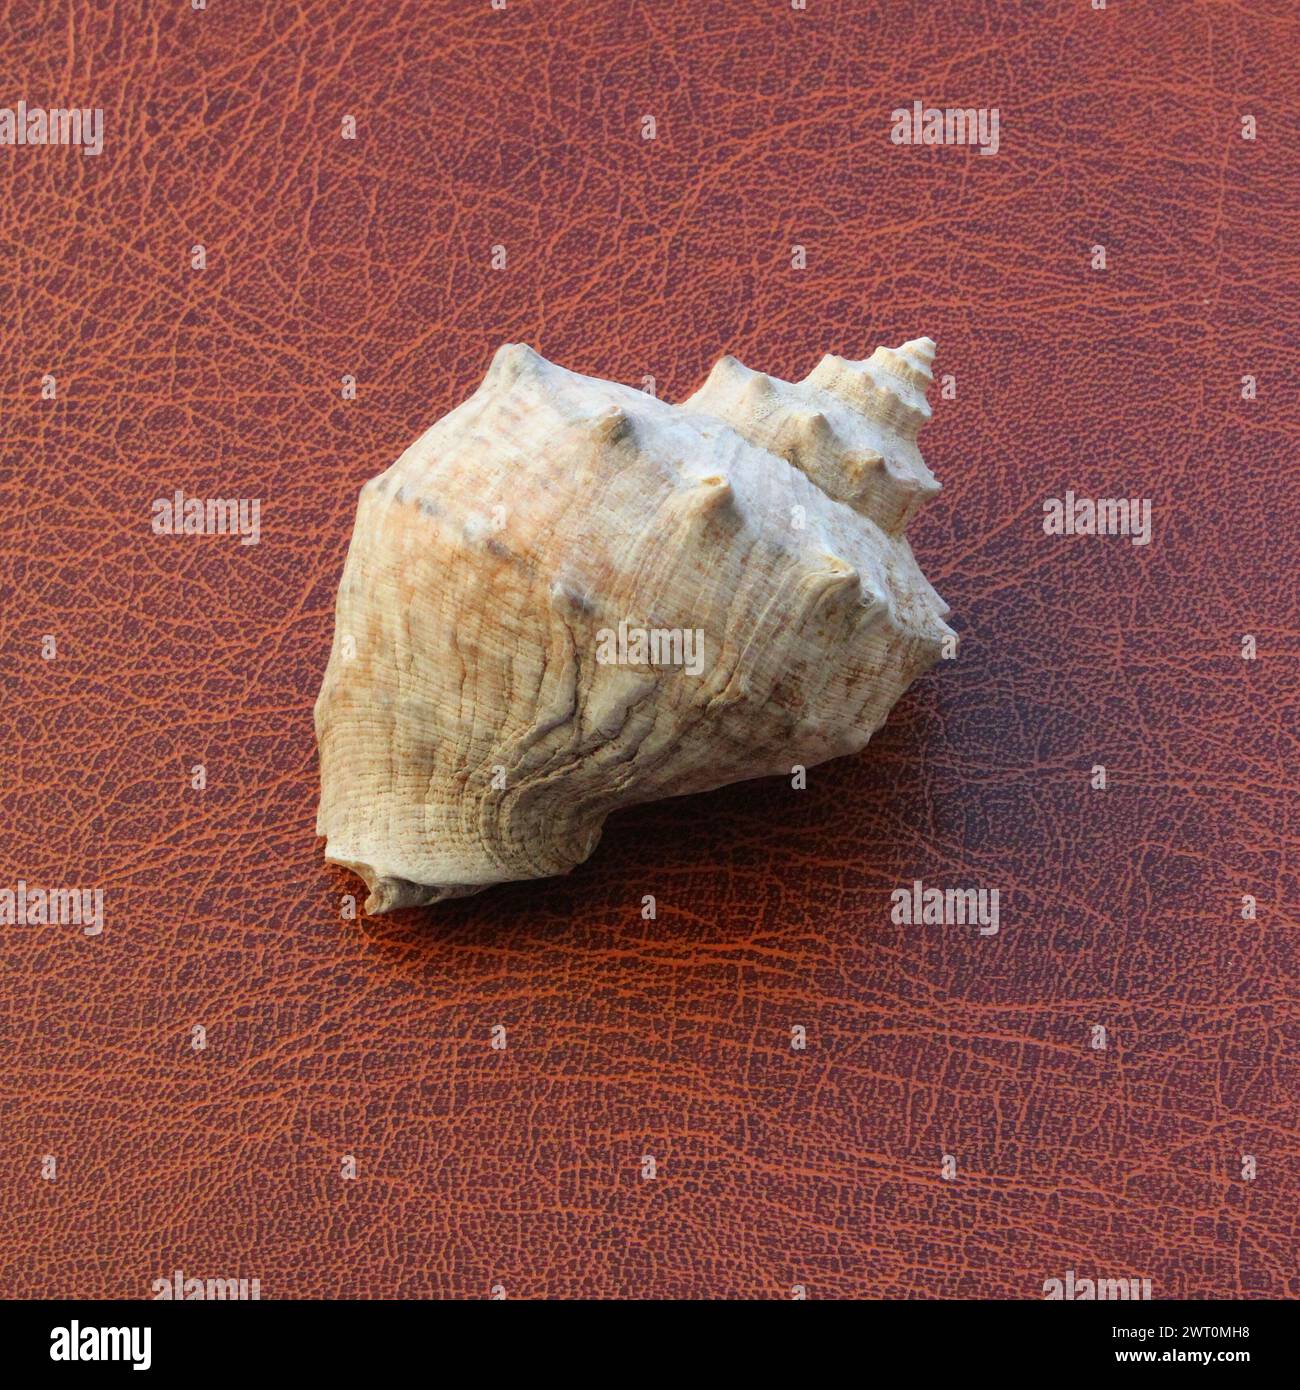 Stripe Conch Shell On Brown Leather Surface Square Stock Photo Stock Photo